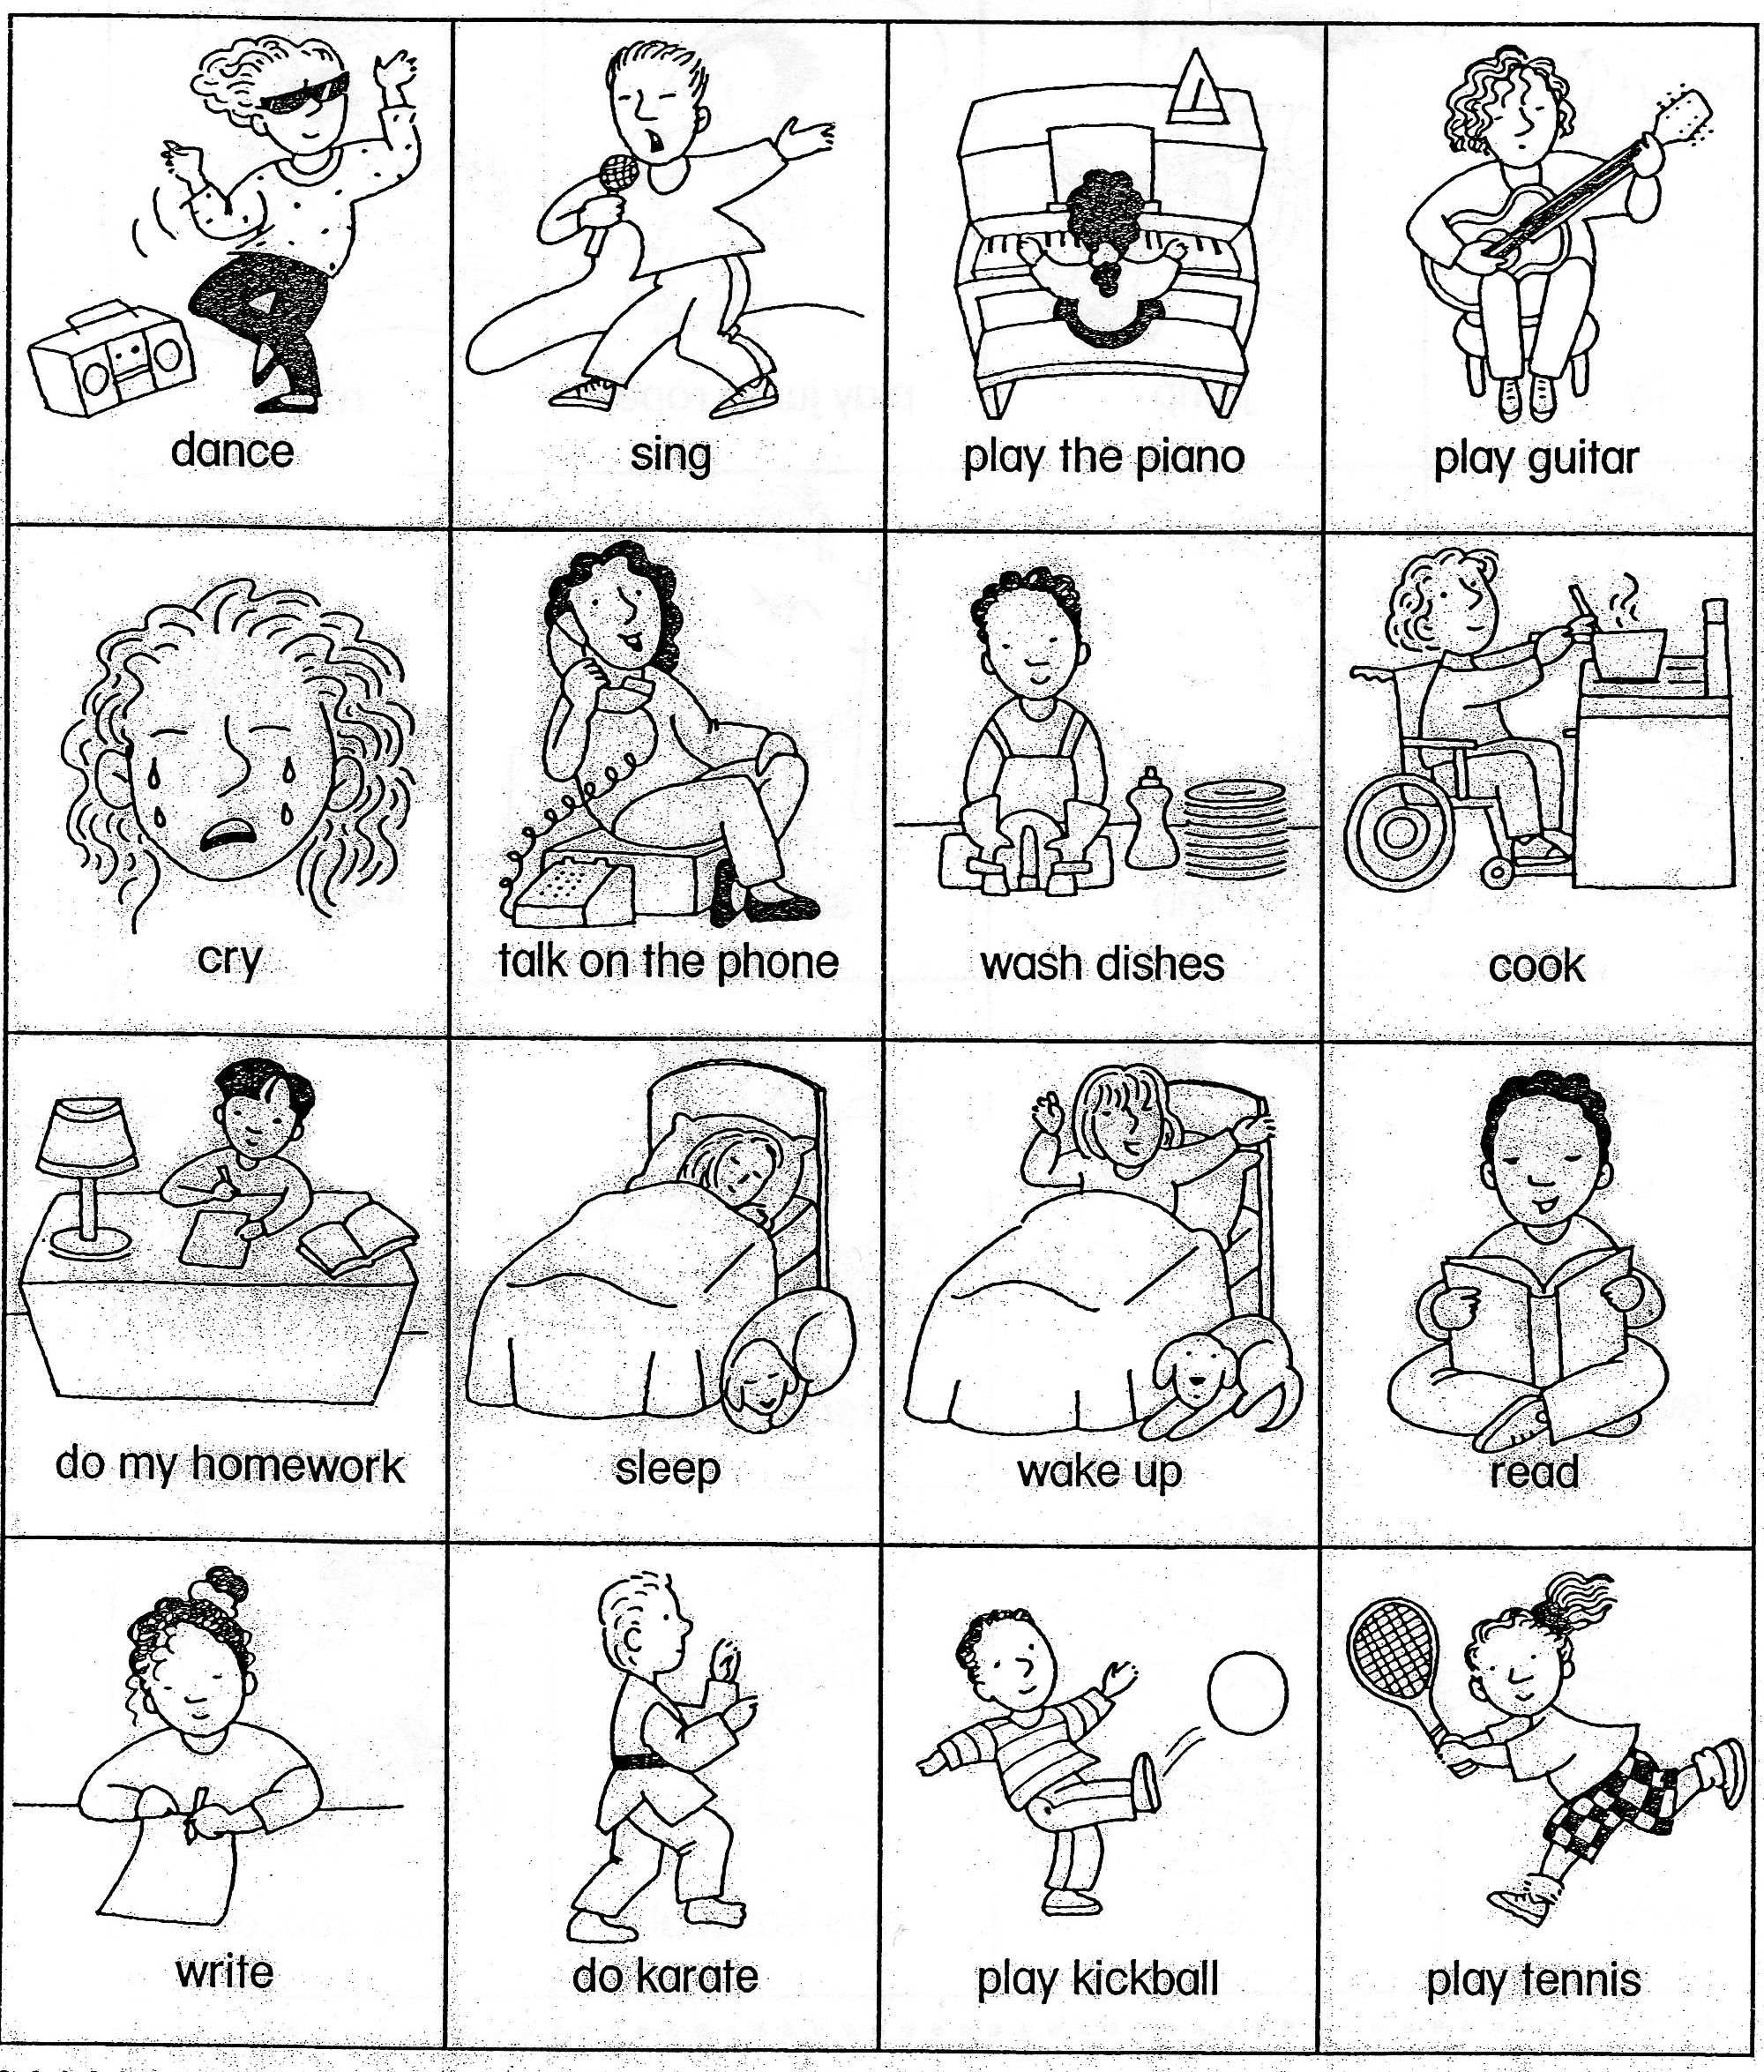 15 Best Images Of Action Words Worksheet Action Words Worksheets Kindergarten Action Words